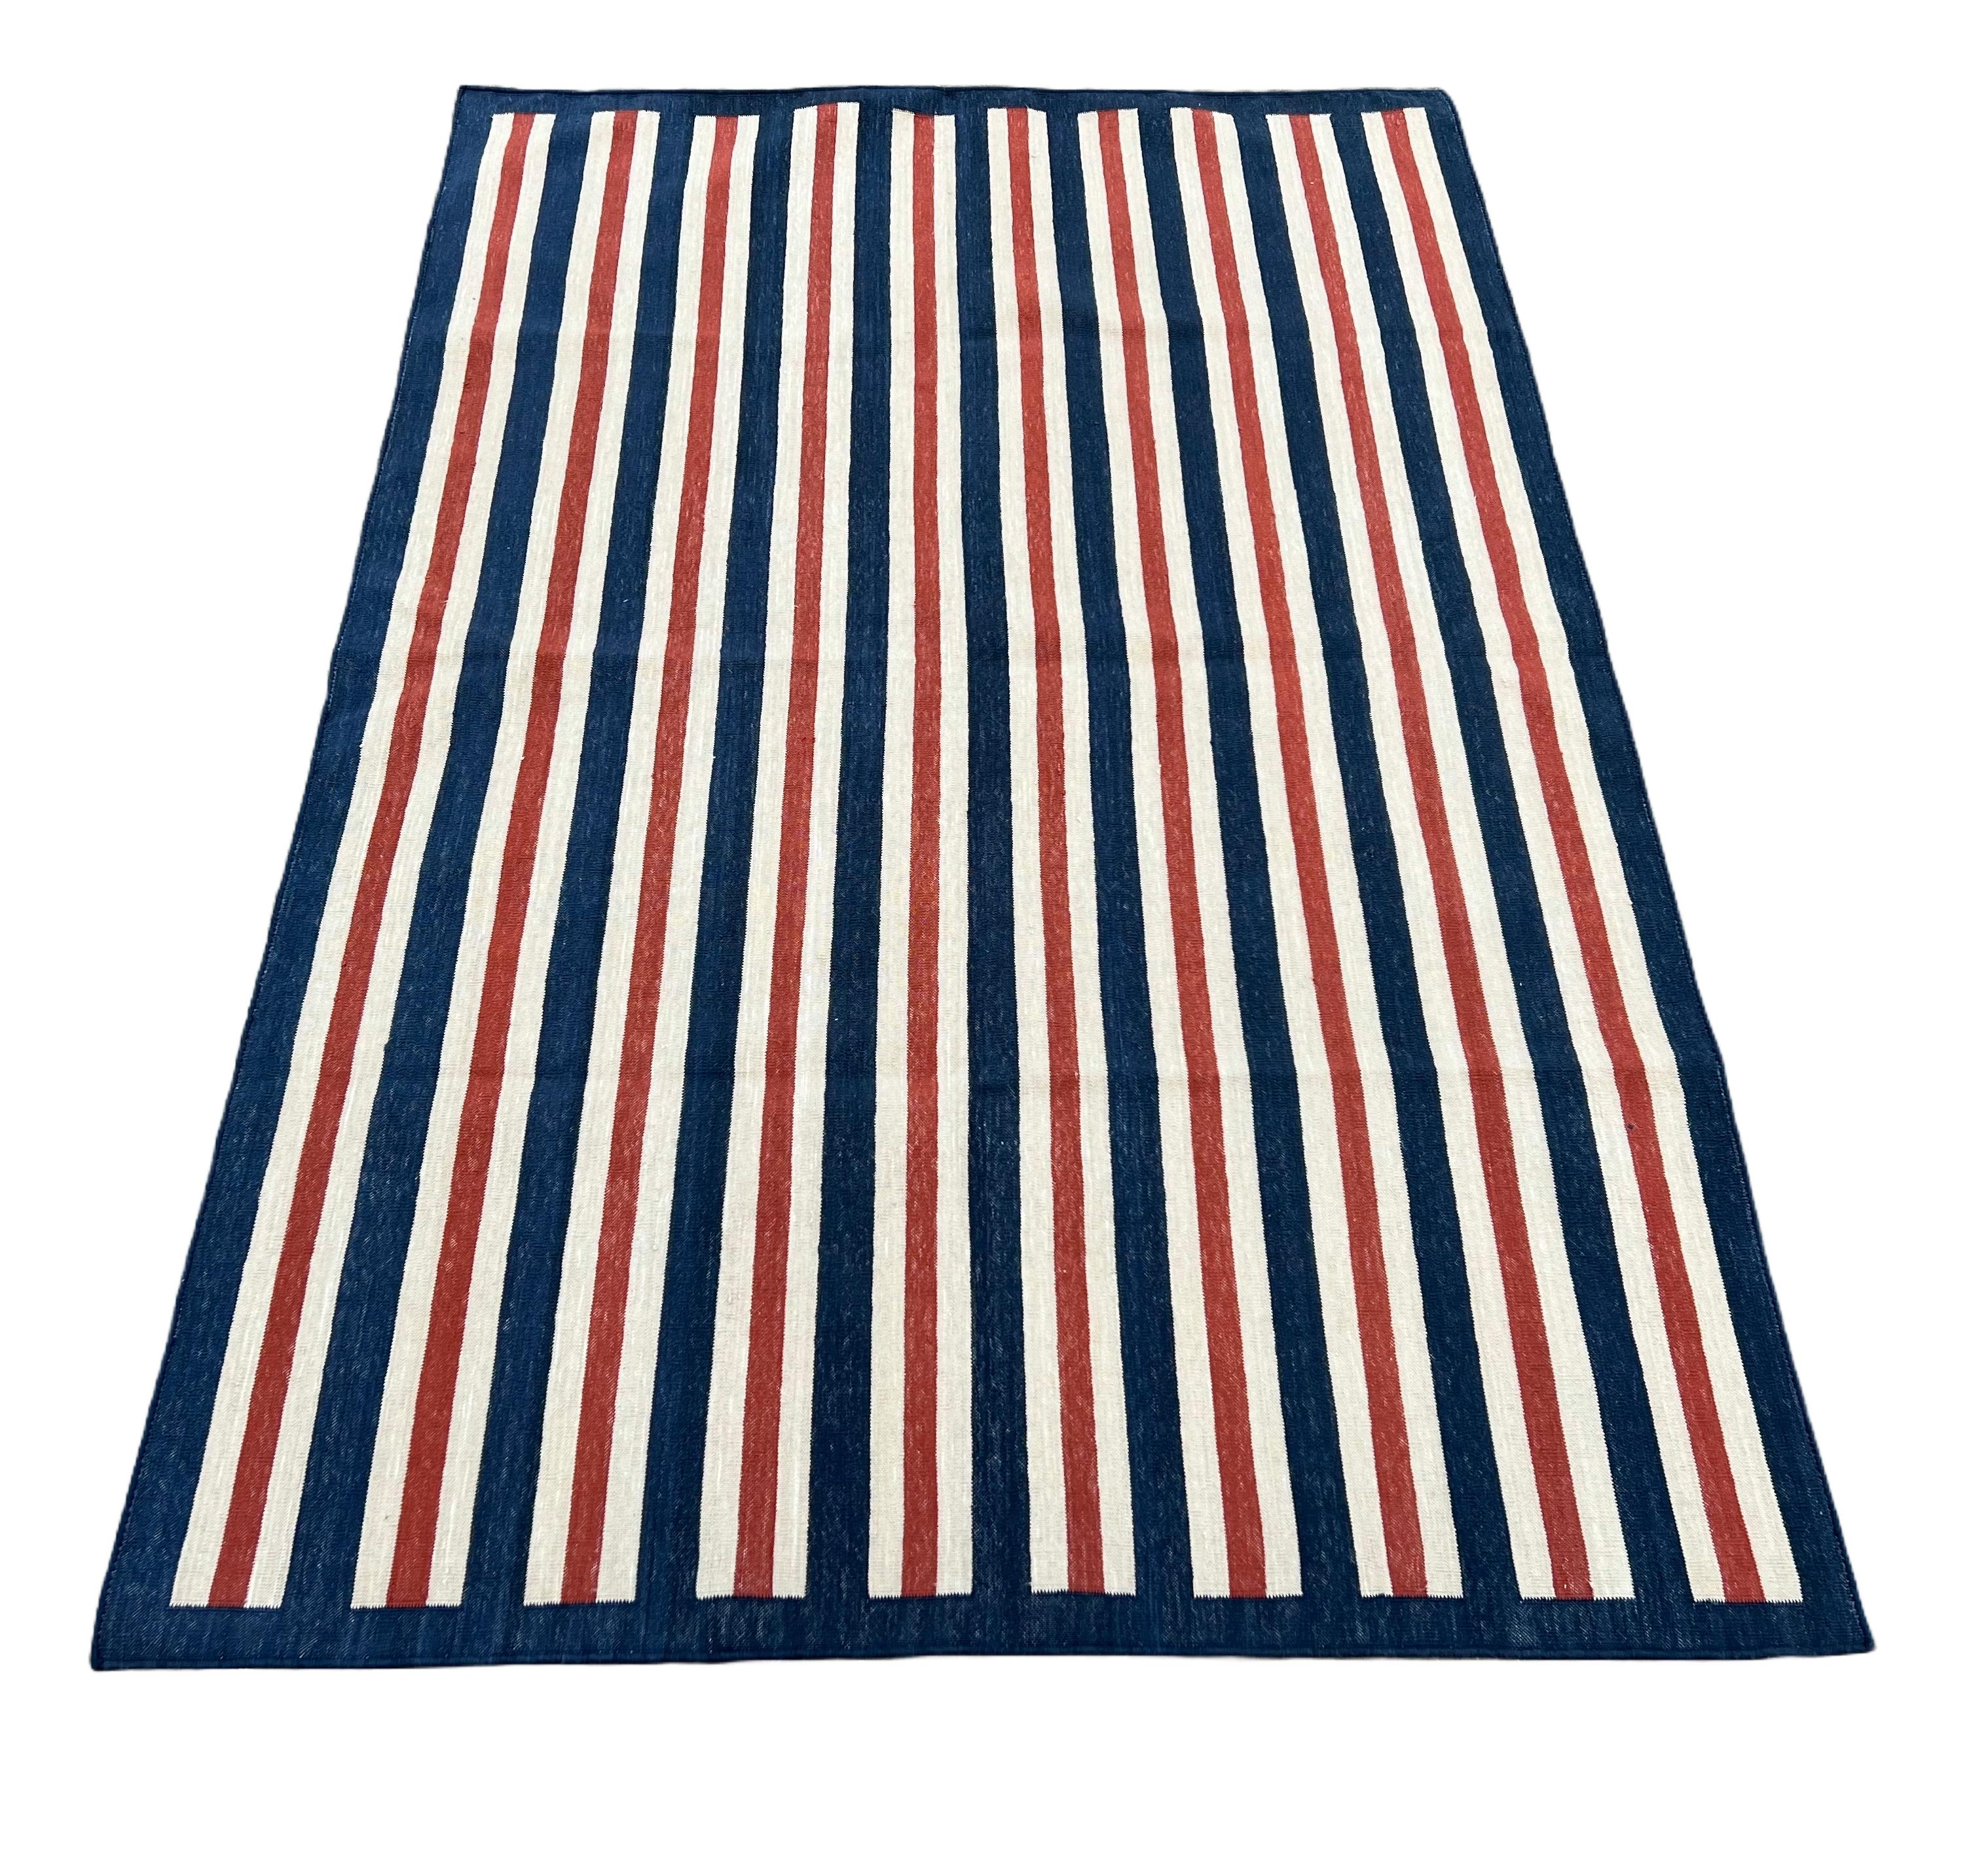 Handmade Cotton Area Flat Weave Rug, 3x5 Blue And Red Striped Indian Dhurrie Rug For Sale 2